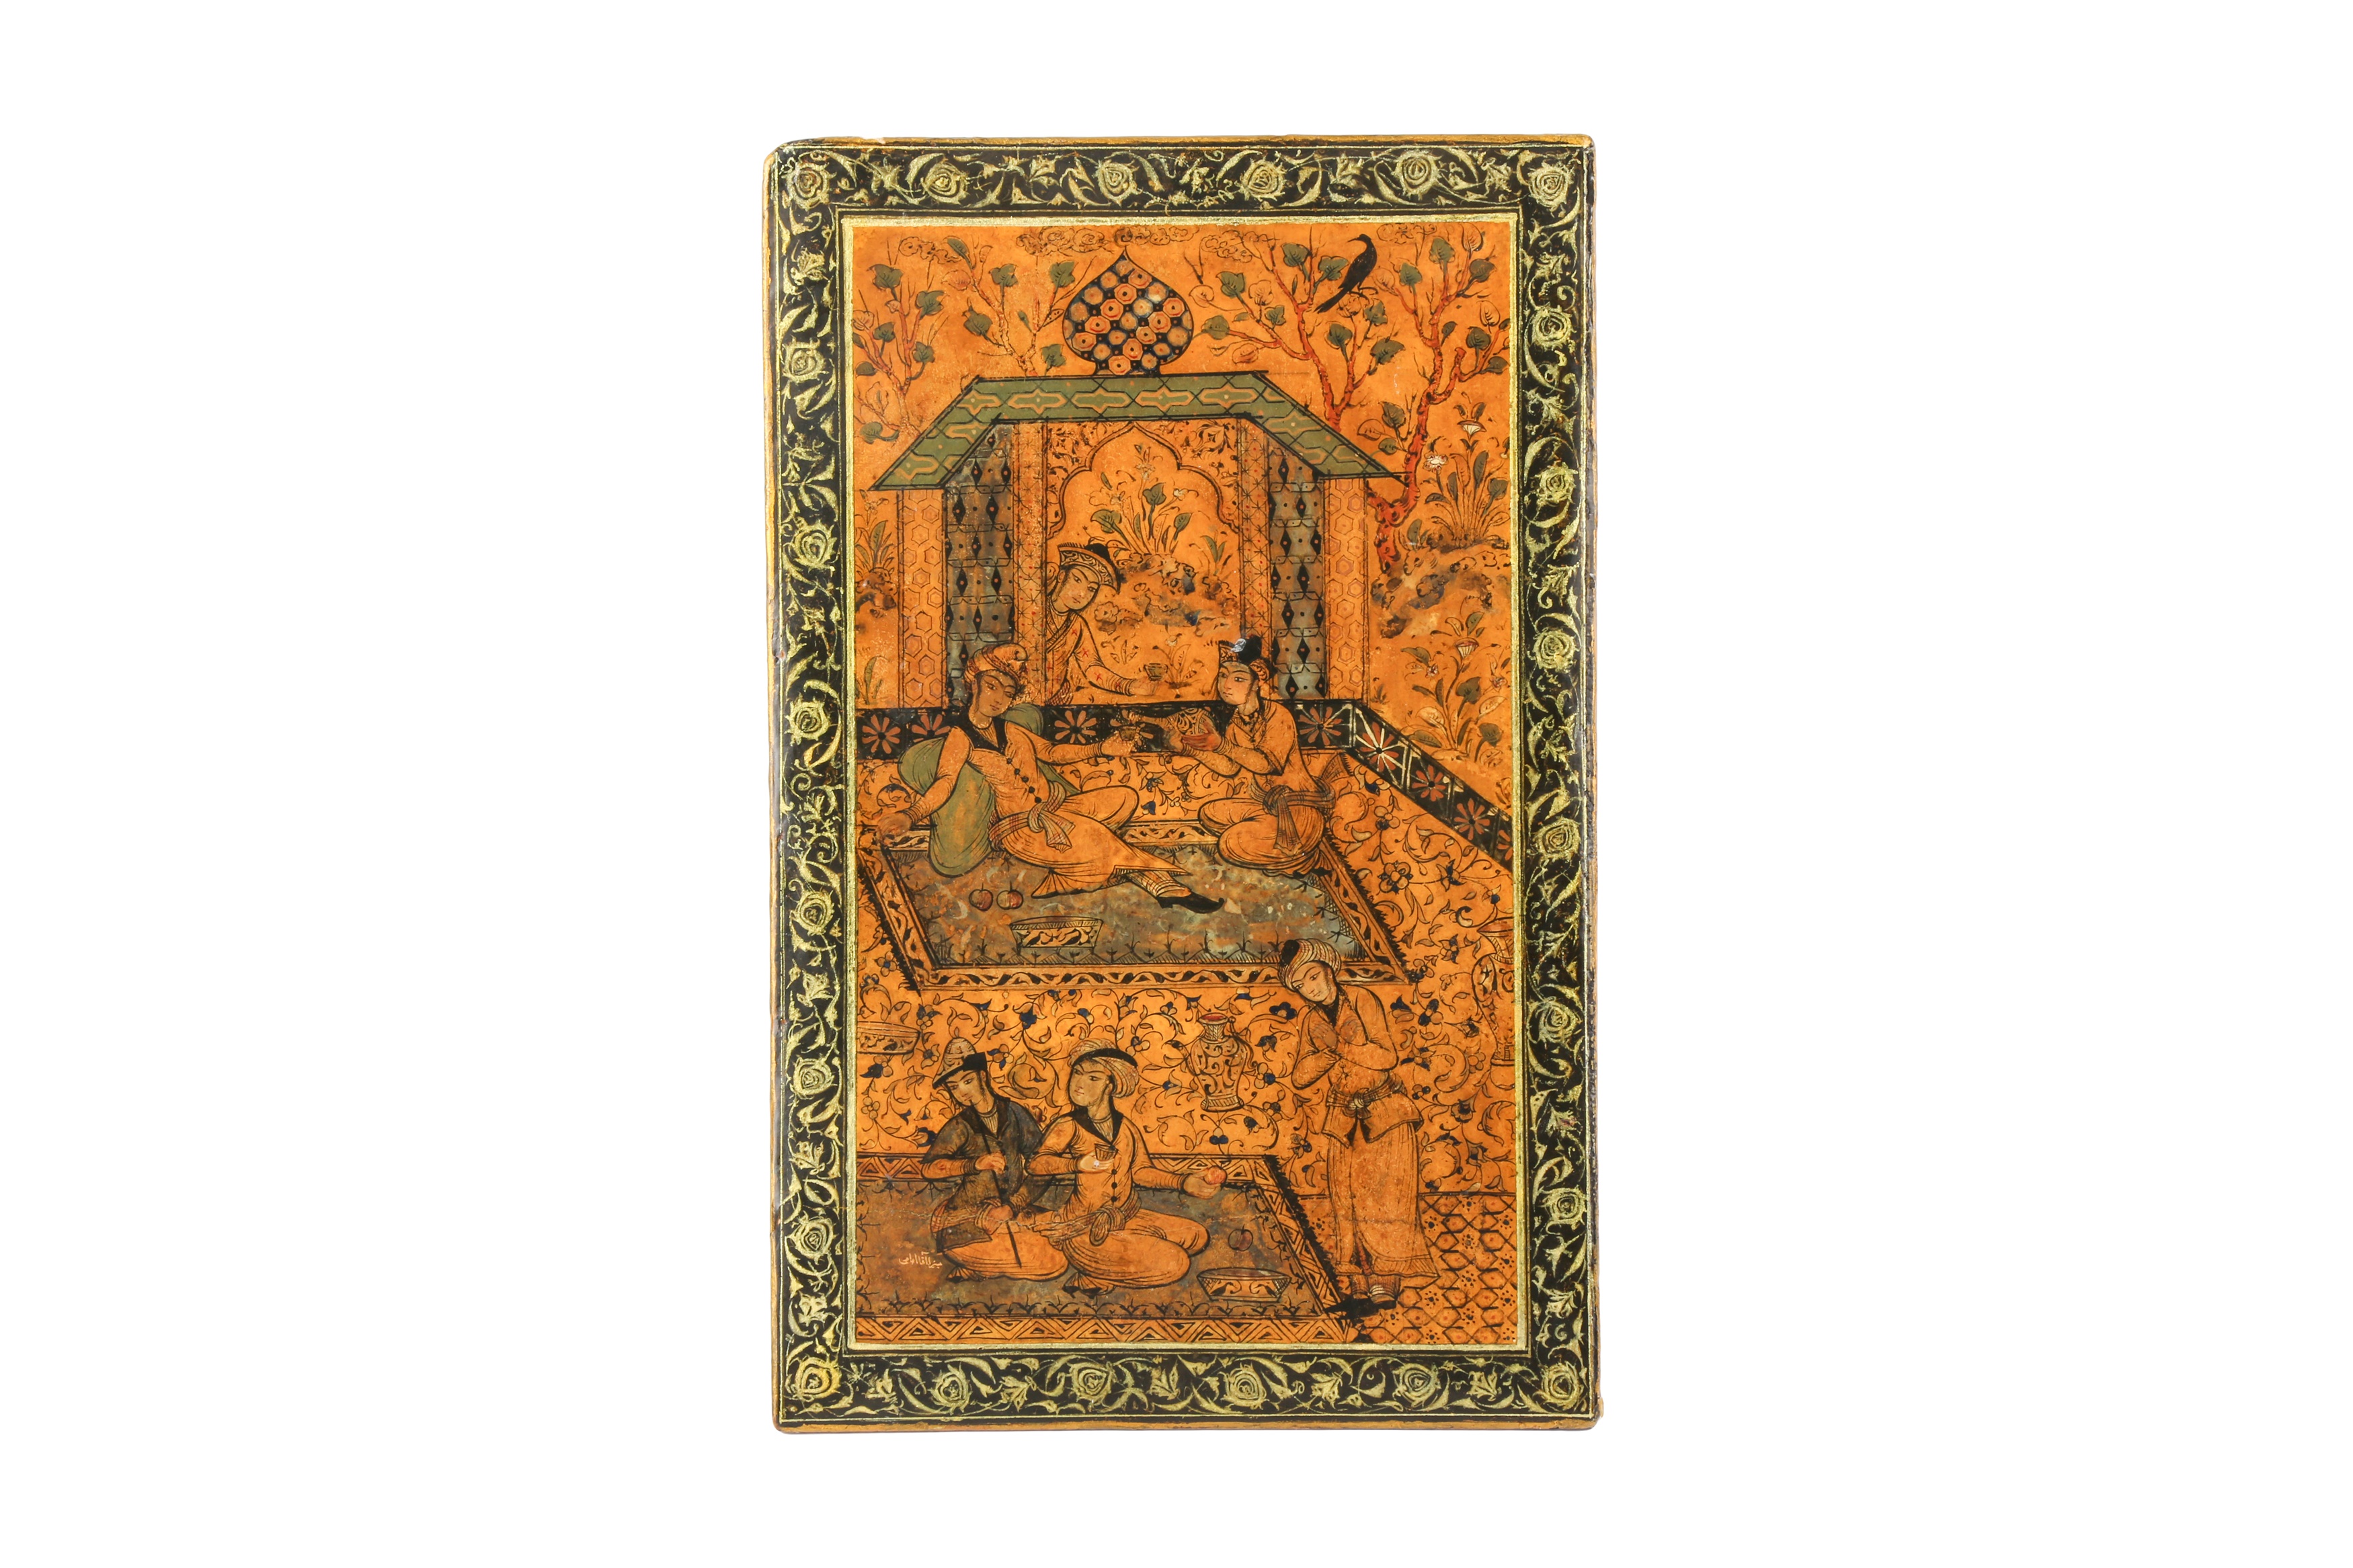 A LARGE 19TH CENTURY QAJAR LAQUERED BOOKBINDING COVER